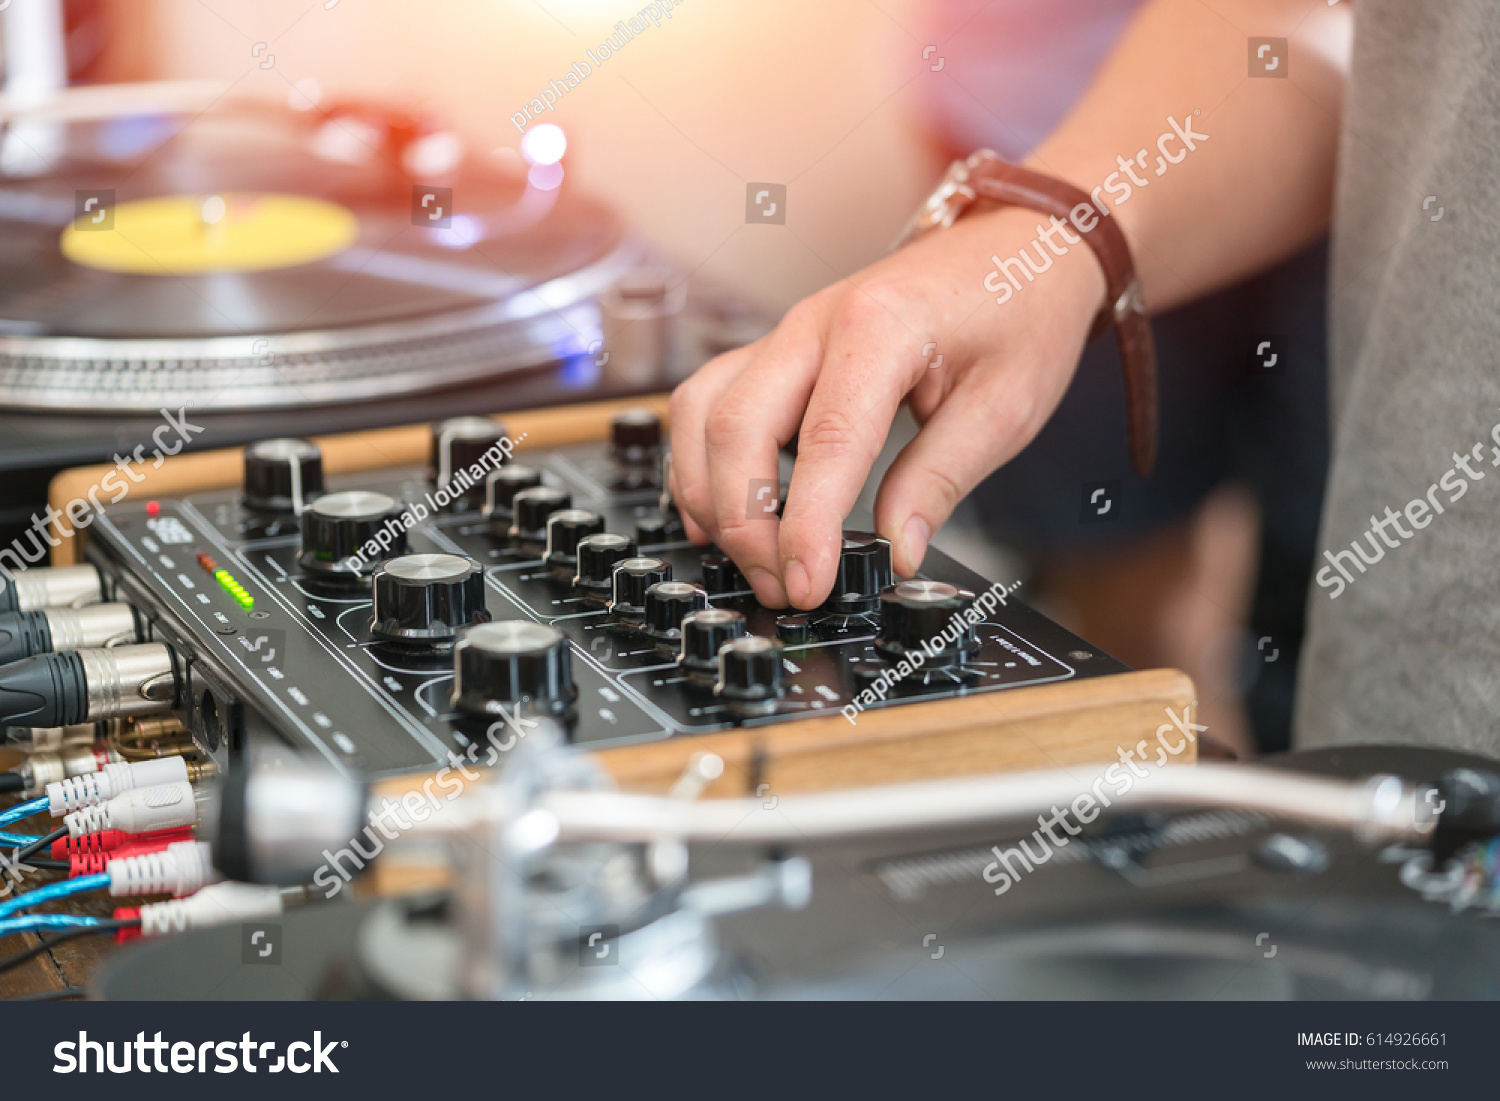 Dj play music at hip hop party.Turntable vinyl record player,analog sound technology for disc jockey to scratch vinyl records and mix tracks #614926661